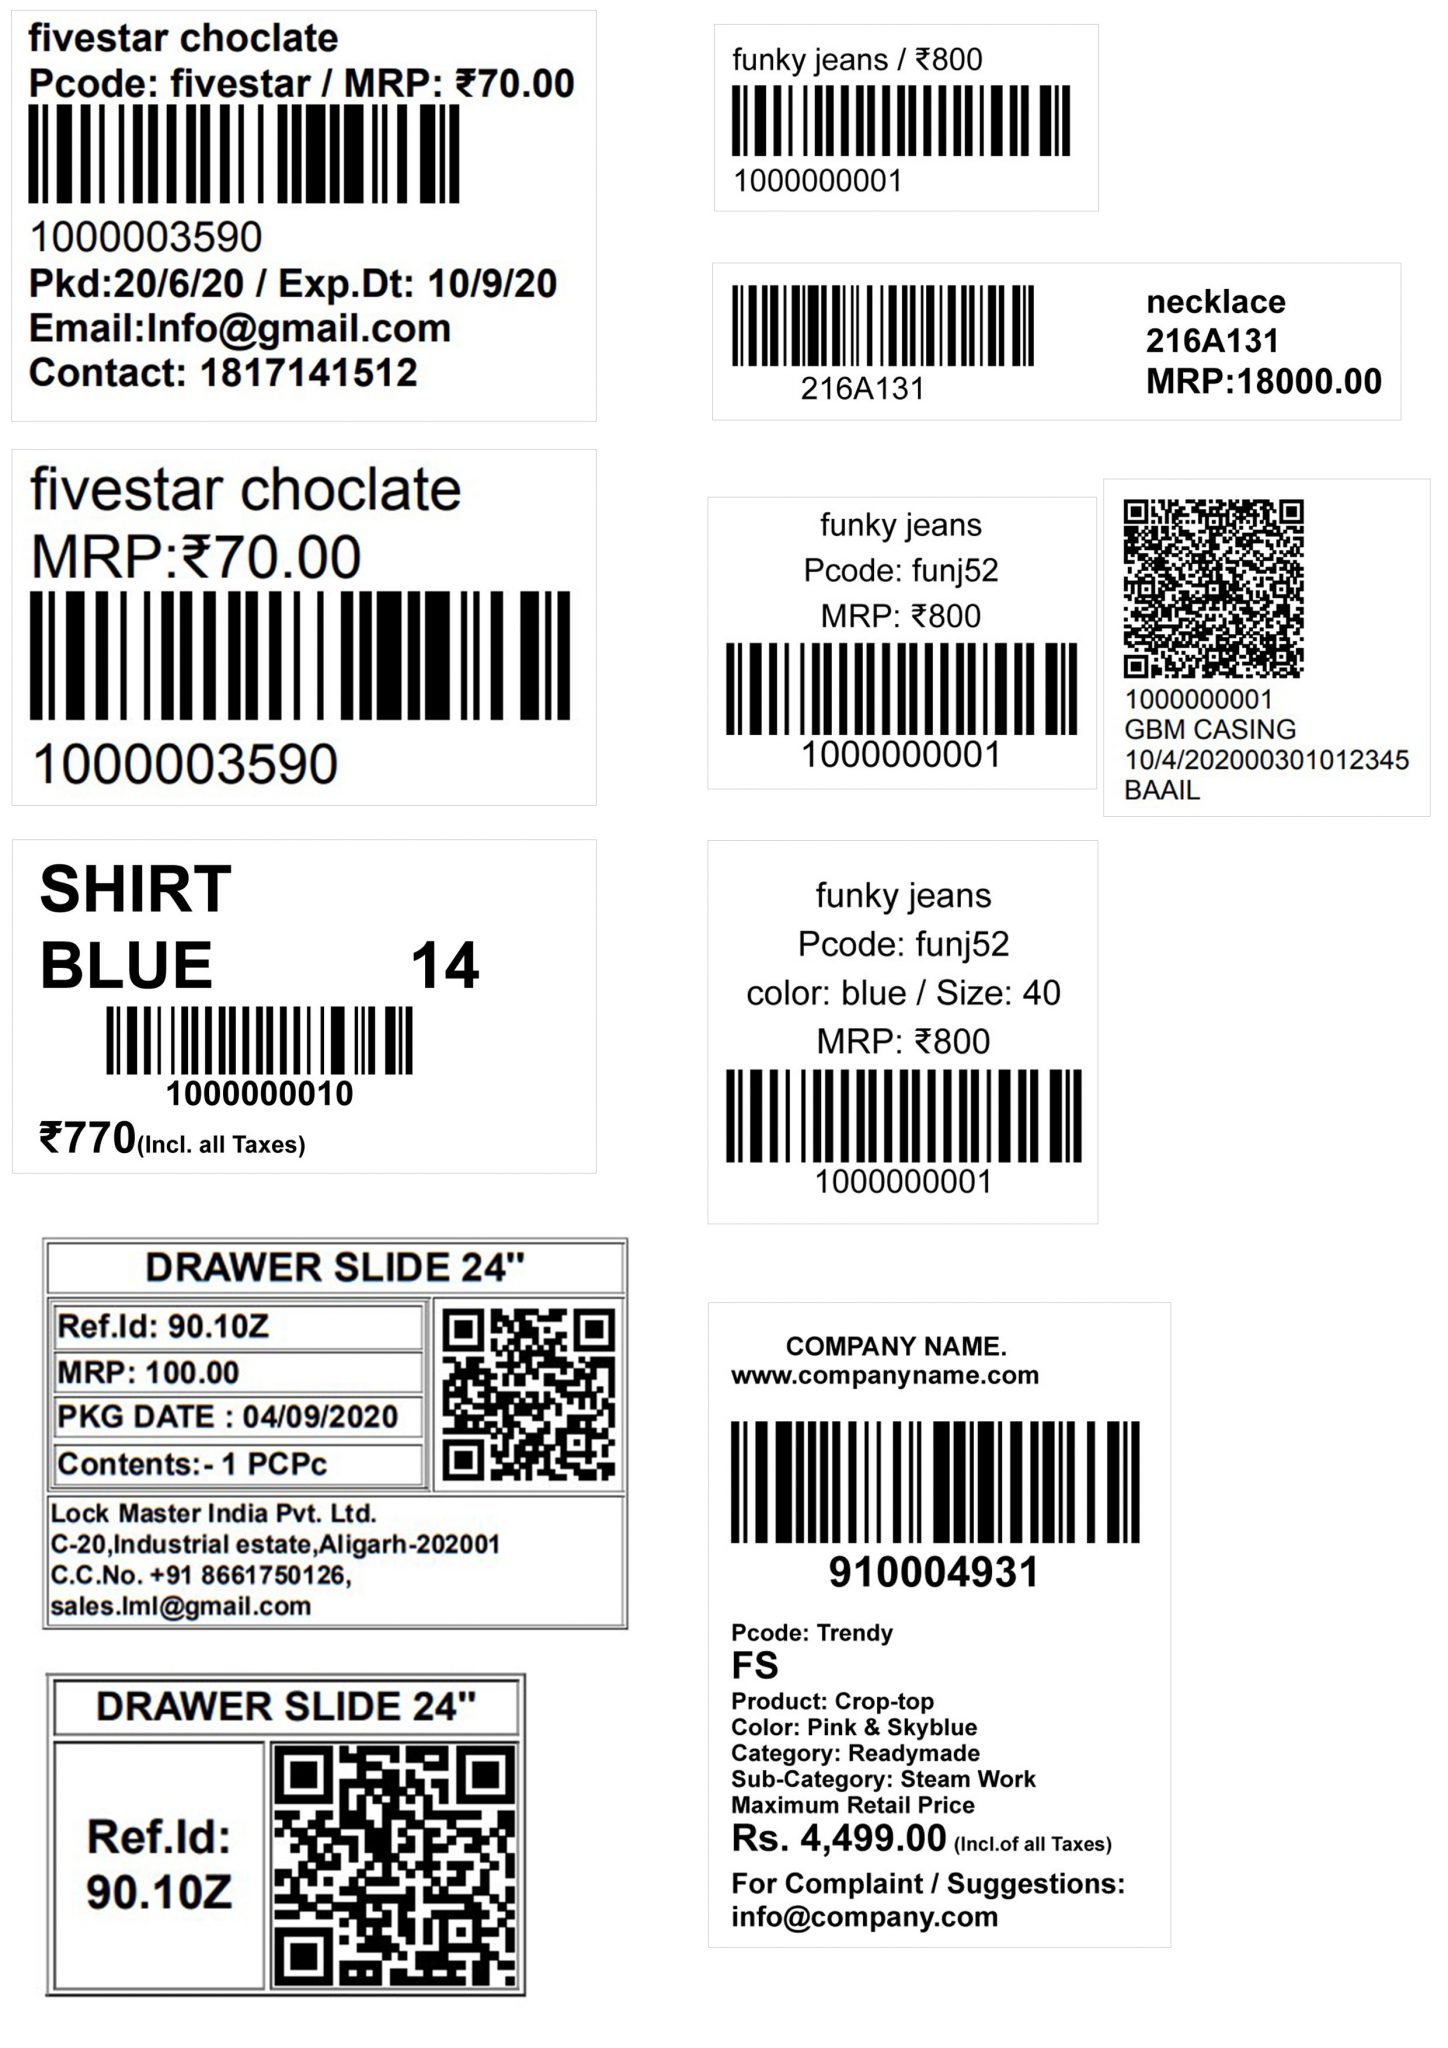 barcode-and-qr-code-label-samples-from-retailcore-software-retailcore